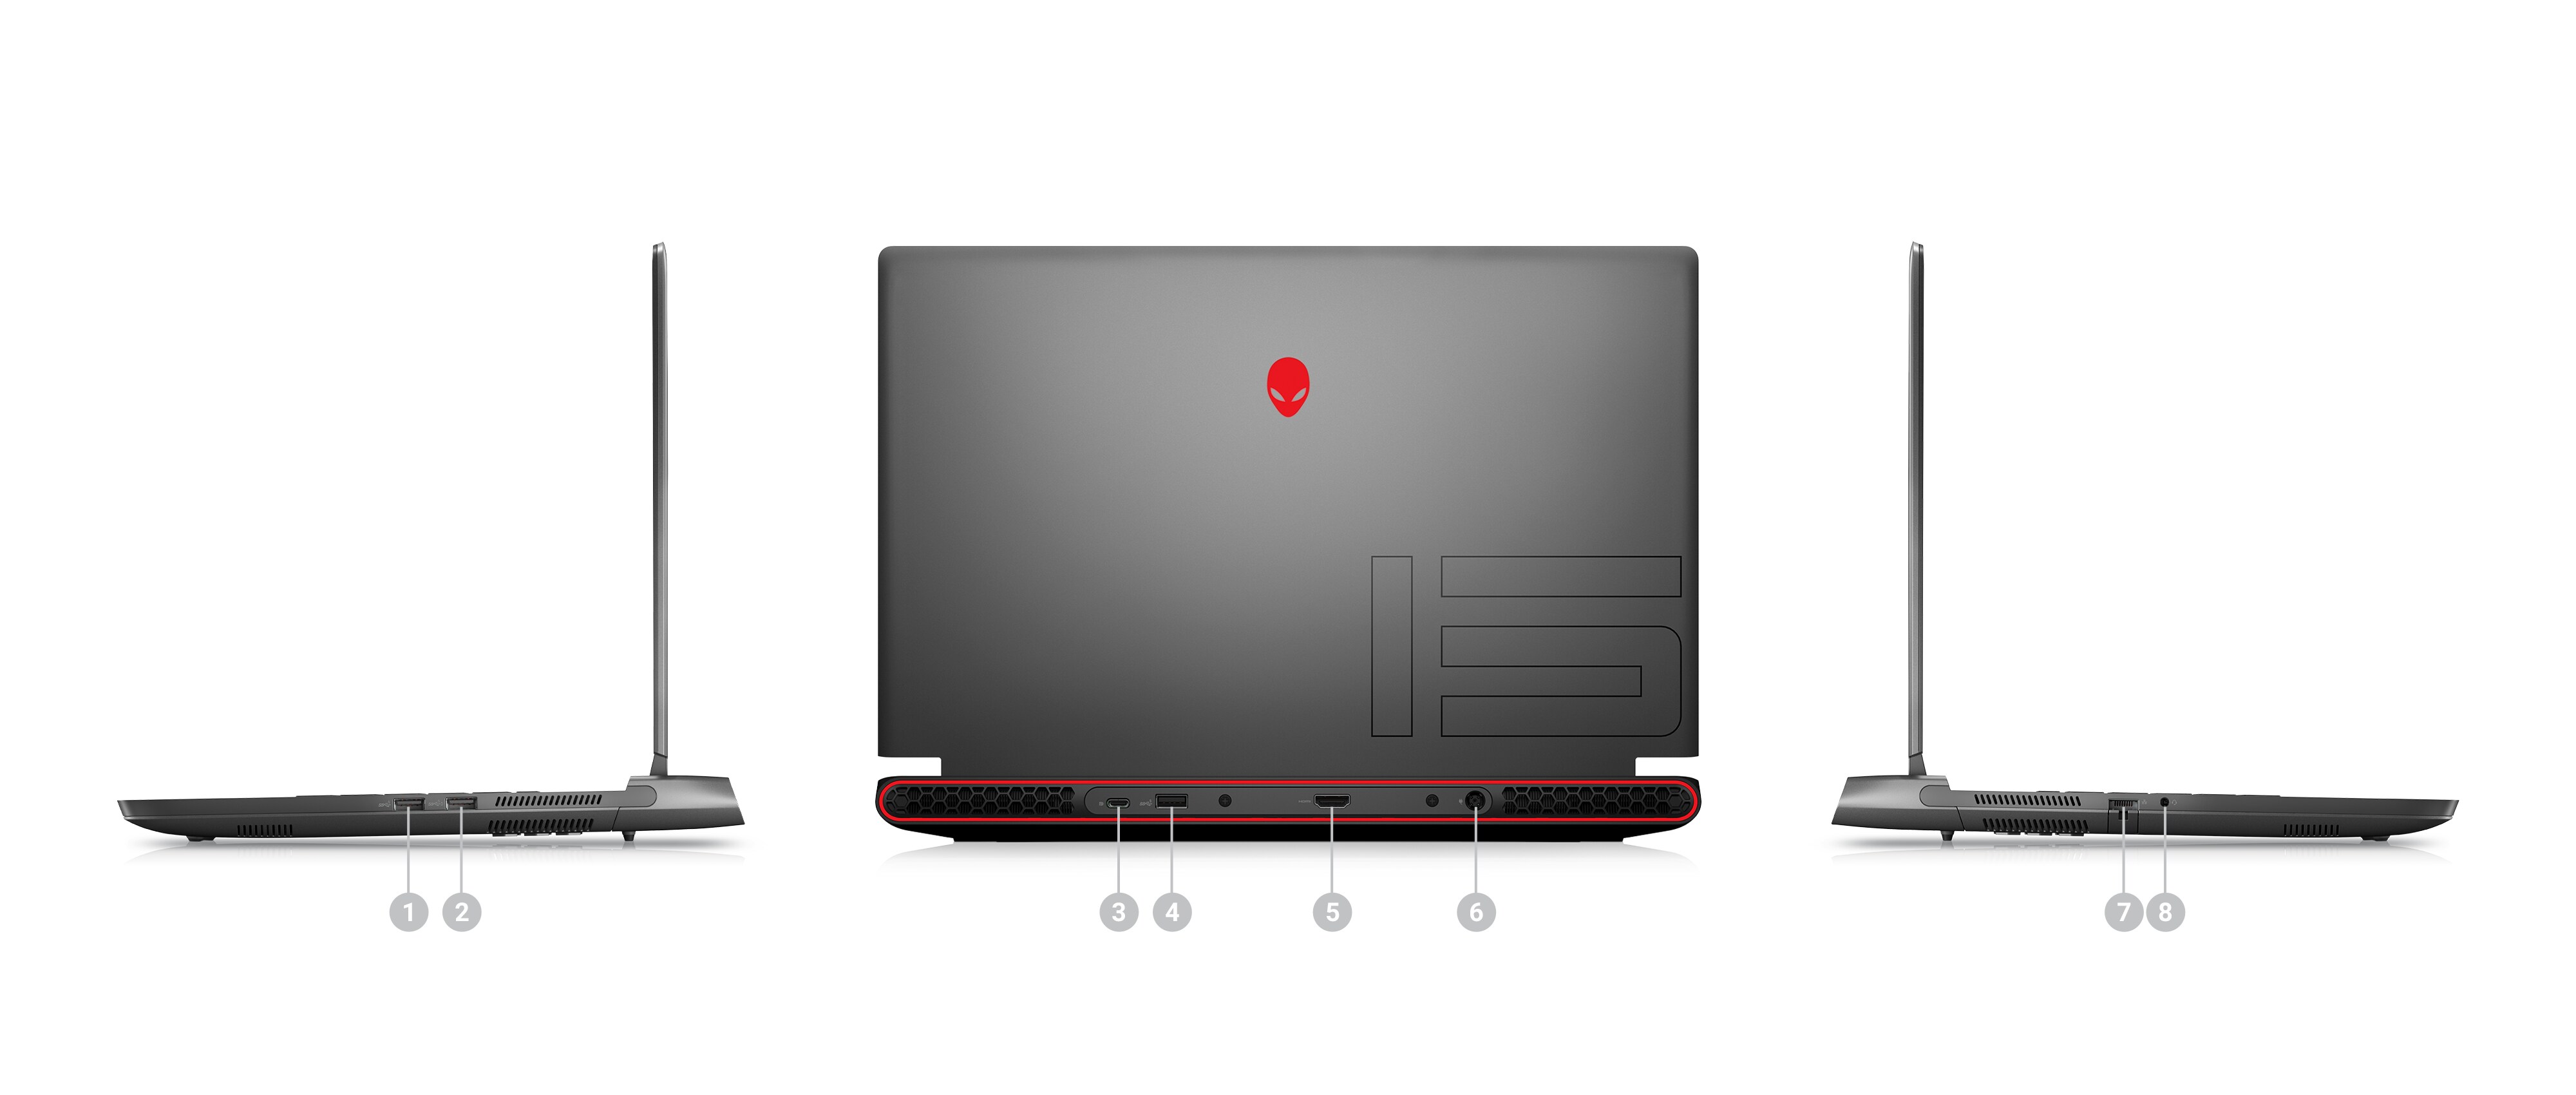 Picture of three Dell Alienware M15 R7 Gaming Laptops with numbers from 1 to 8 signaling product ports and slots.